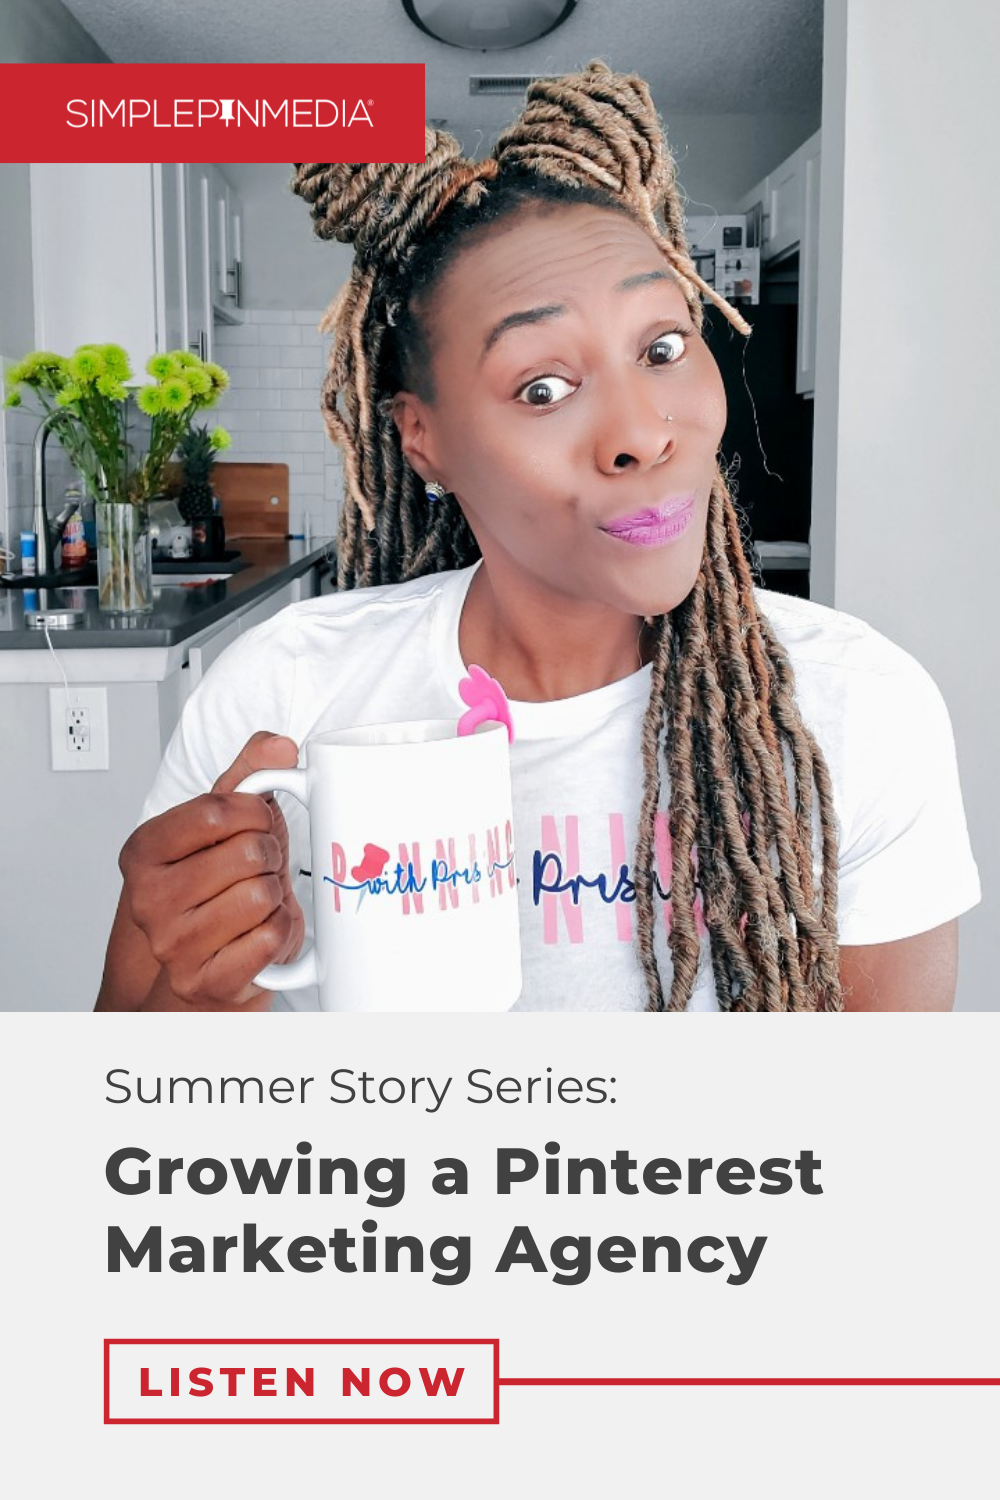 woman holding coffee mug with text "summer story series - growing a pinterest marketing agency".